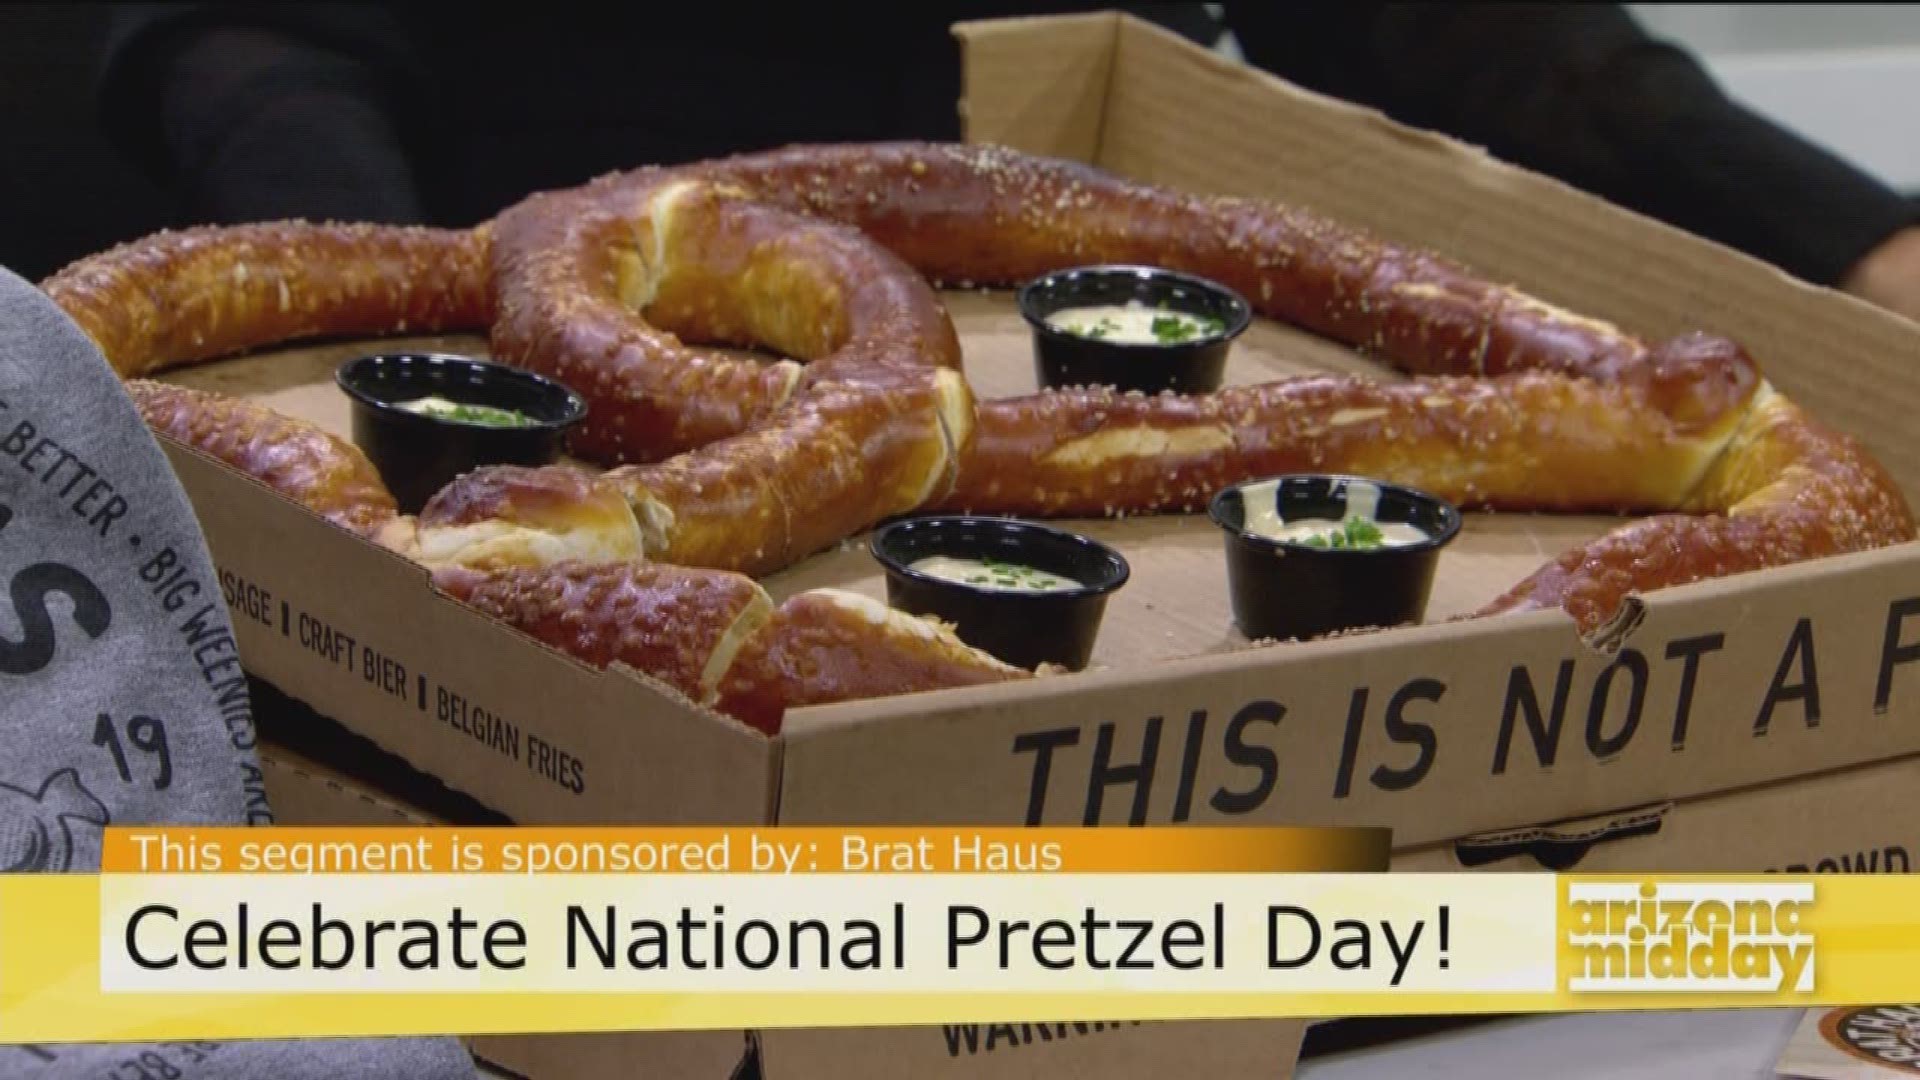 Chad Black with Brat Haus is showing us the delicious pretzels for the best national pretzel day celebration